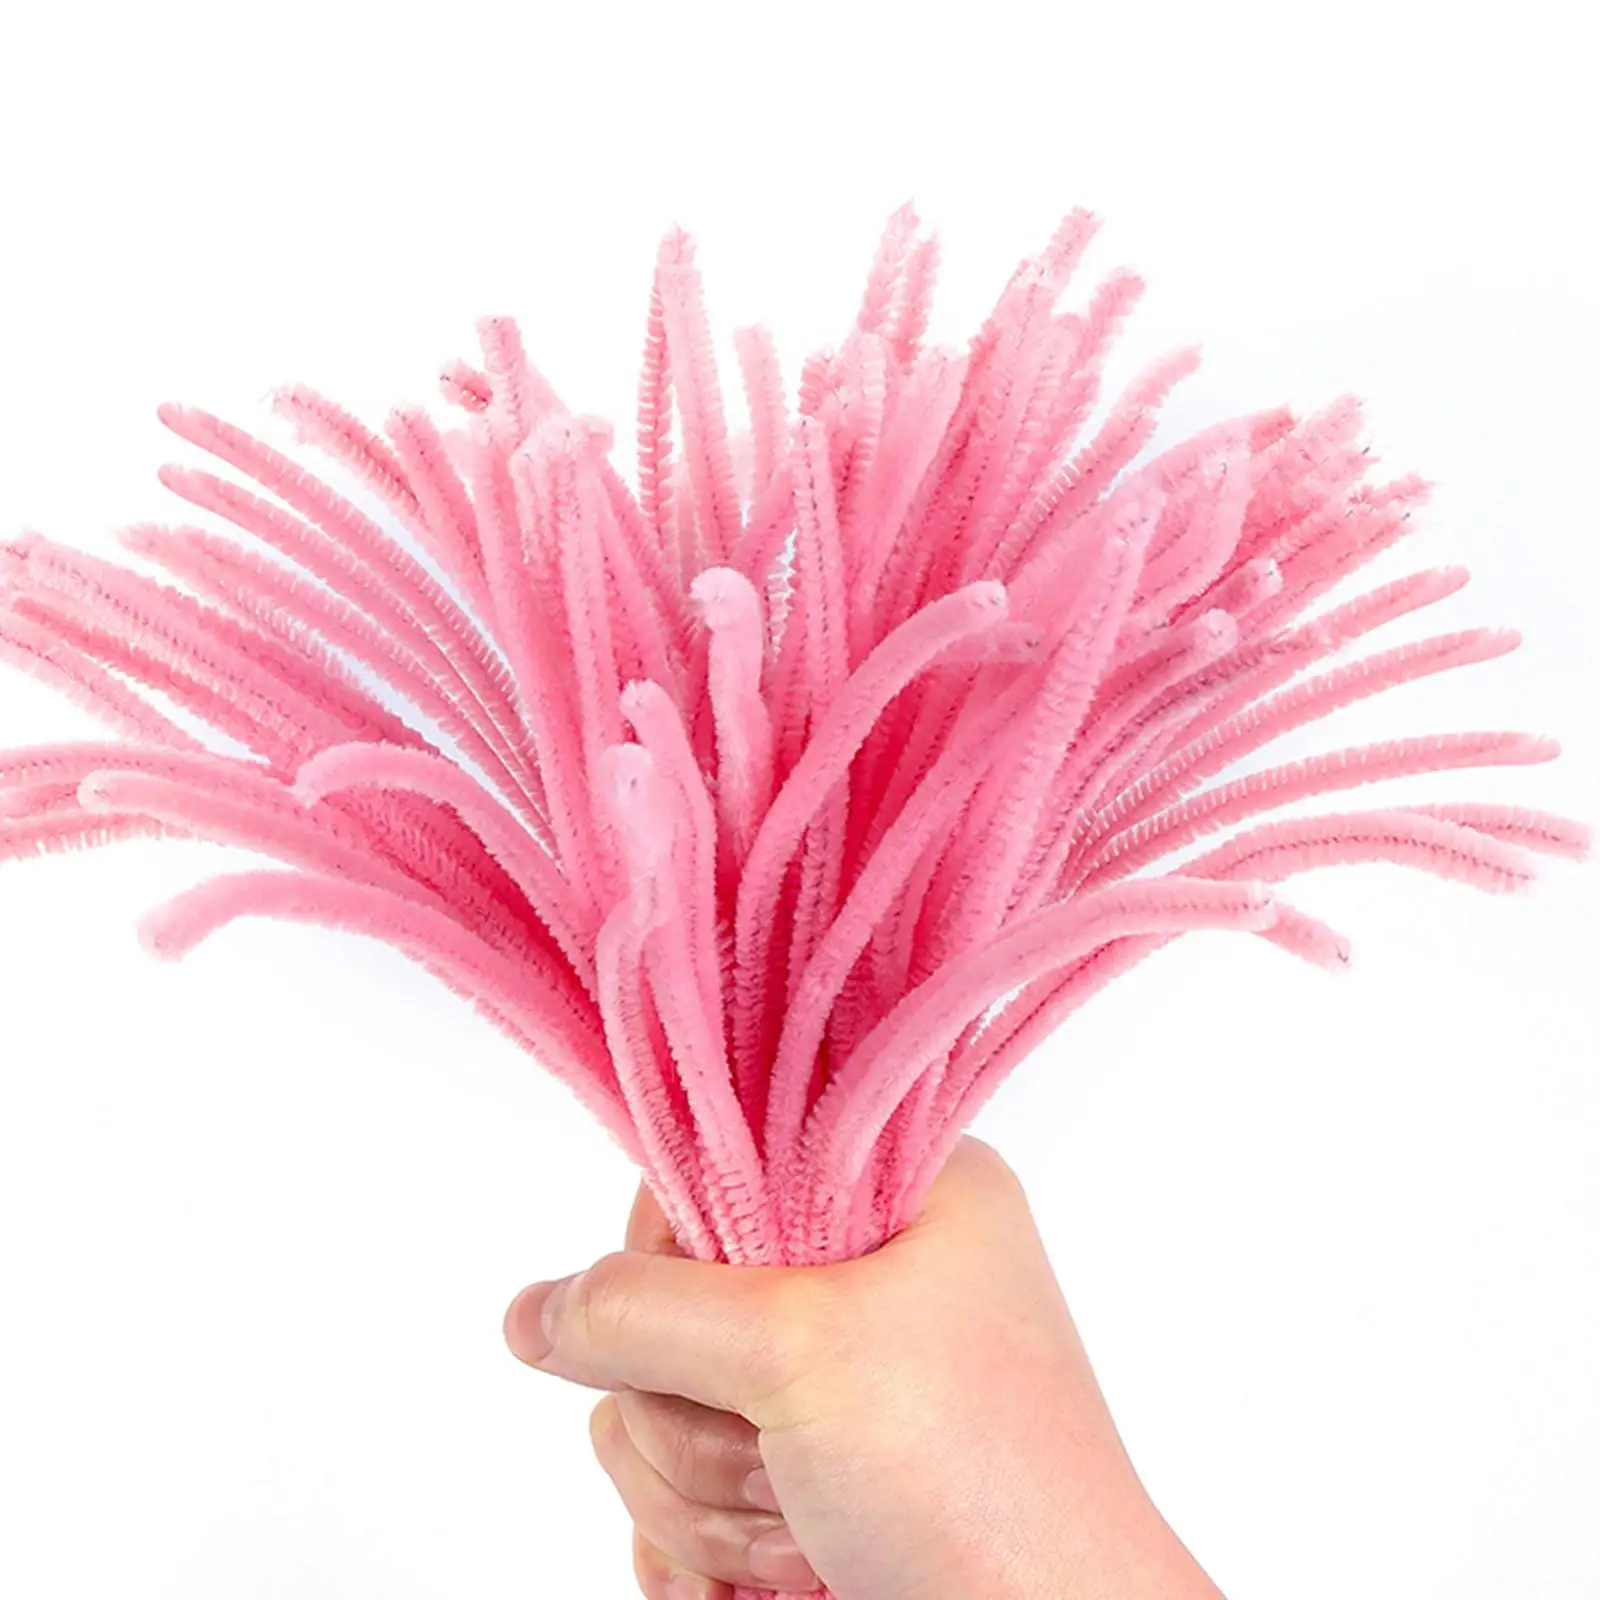 500x Pipe Cleaners Chenille Stems Colorful Arts Craft Handmade for Birthday Supplies